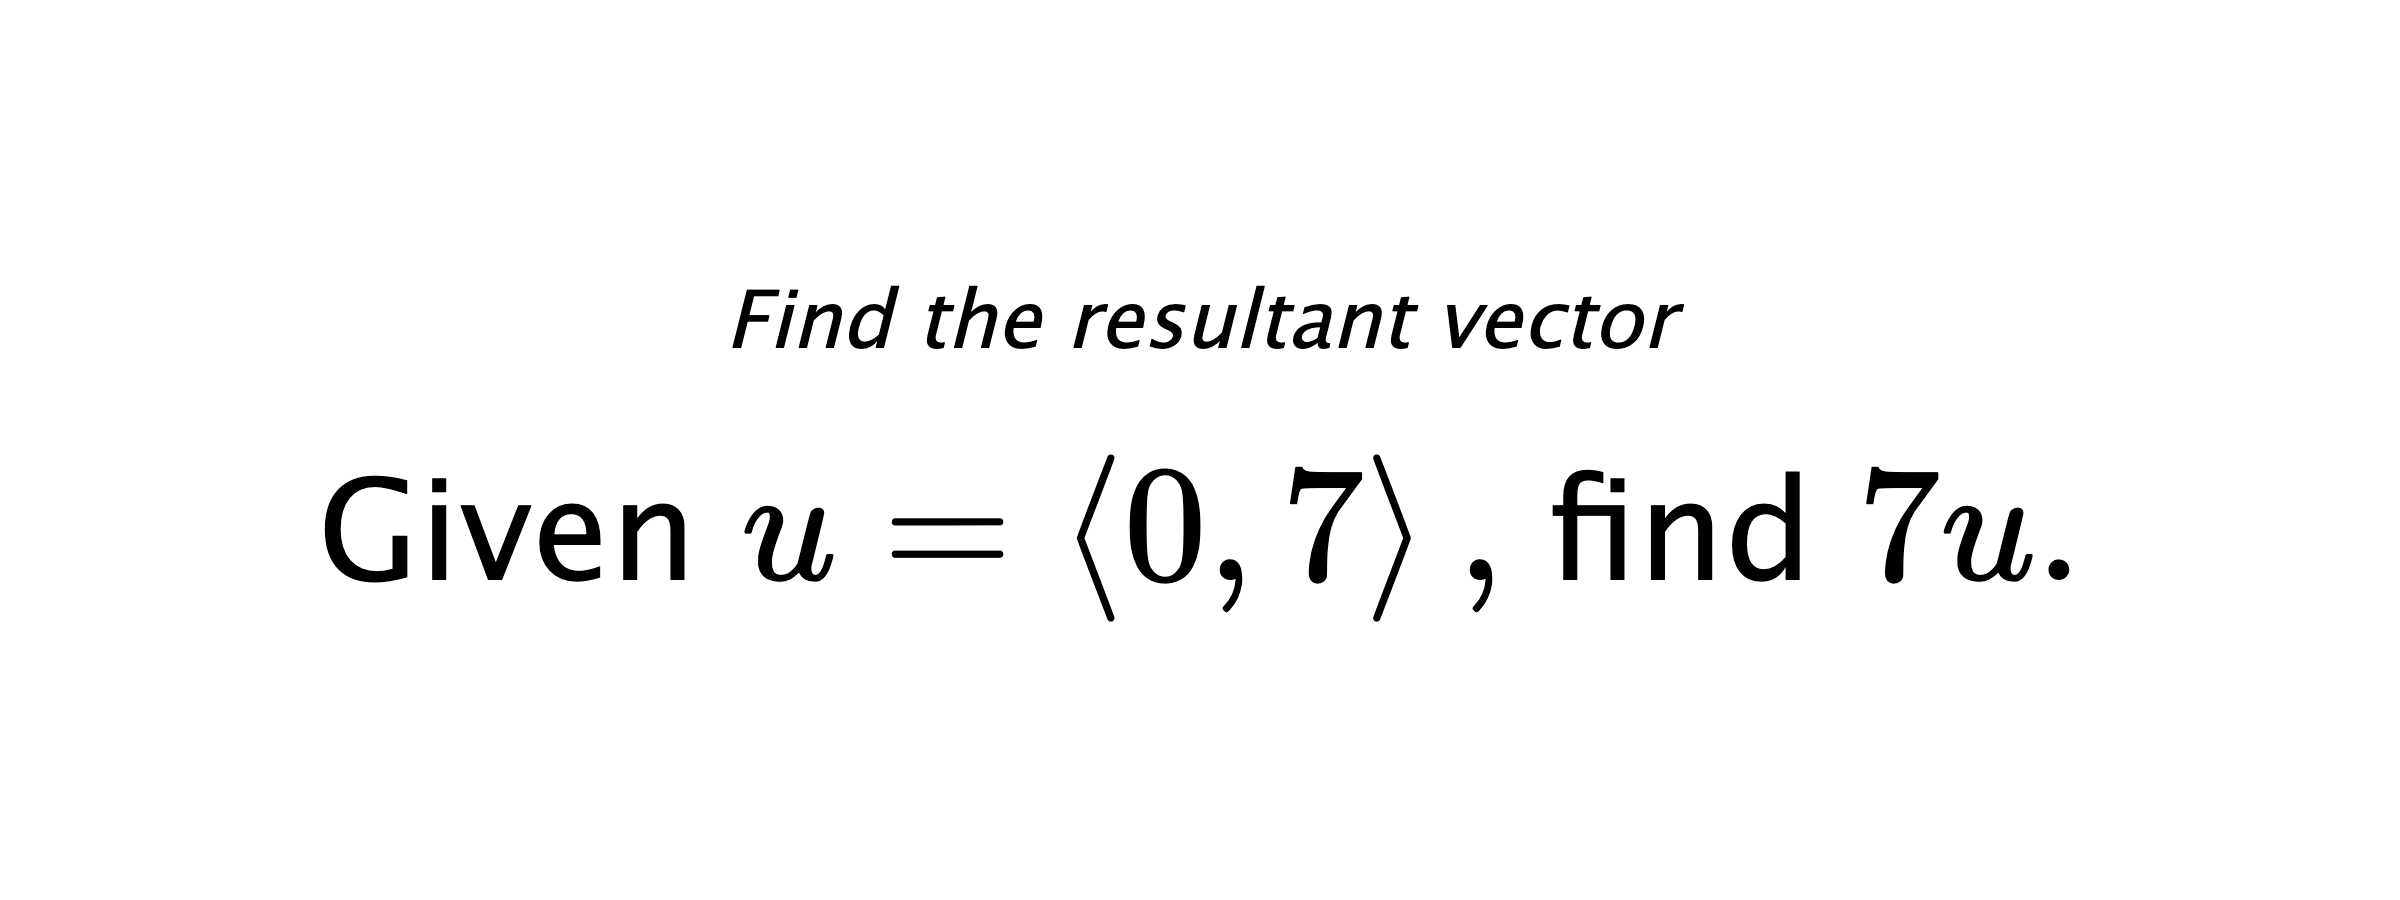 Find the resultant vector Given $ u = \left< 0,7 \right> ,$ find $ 7u .$